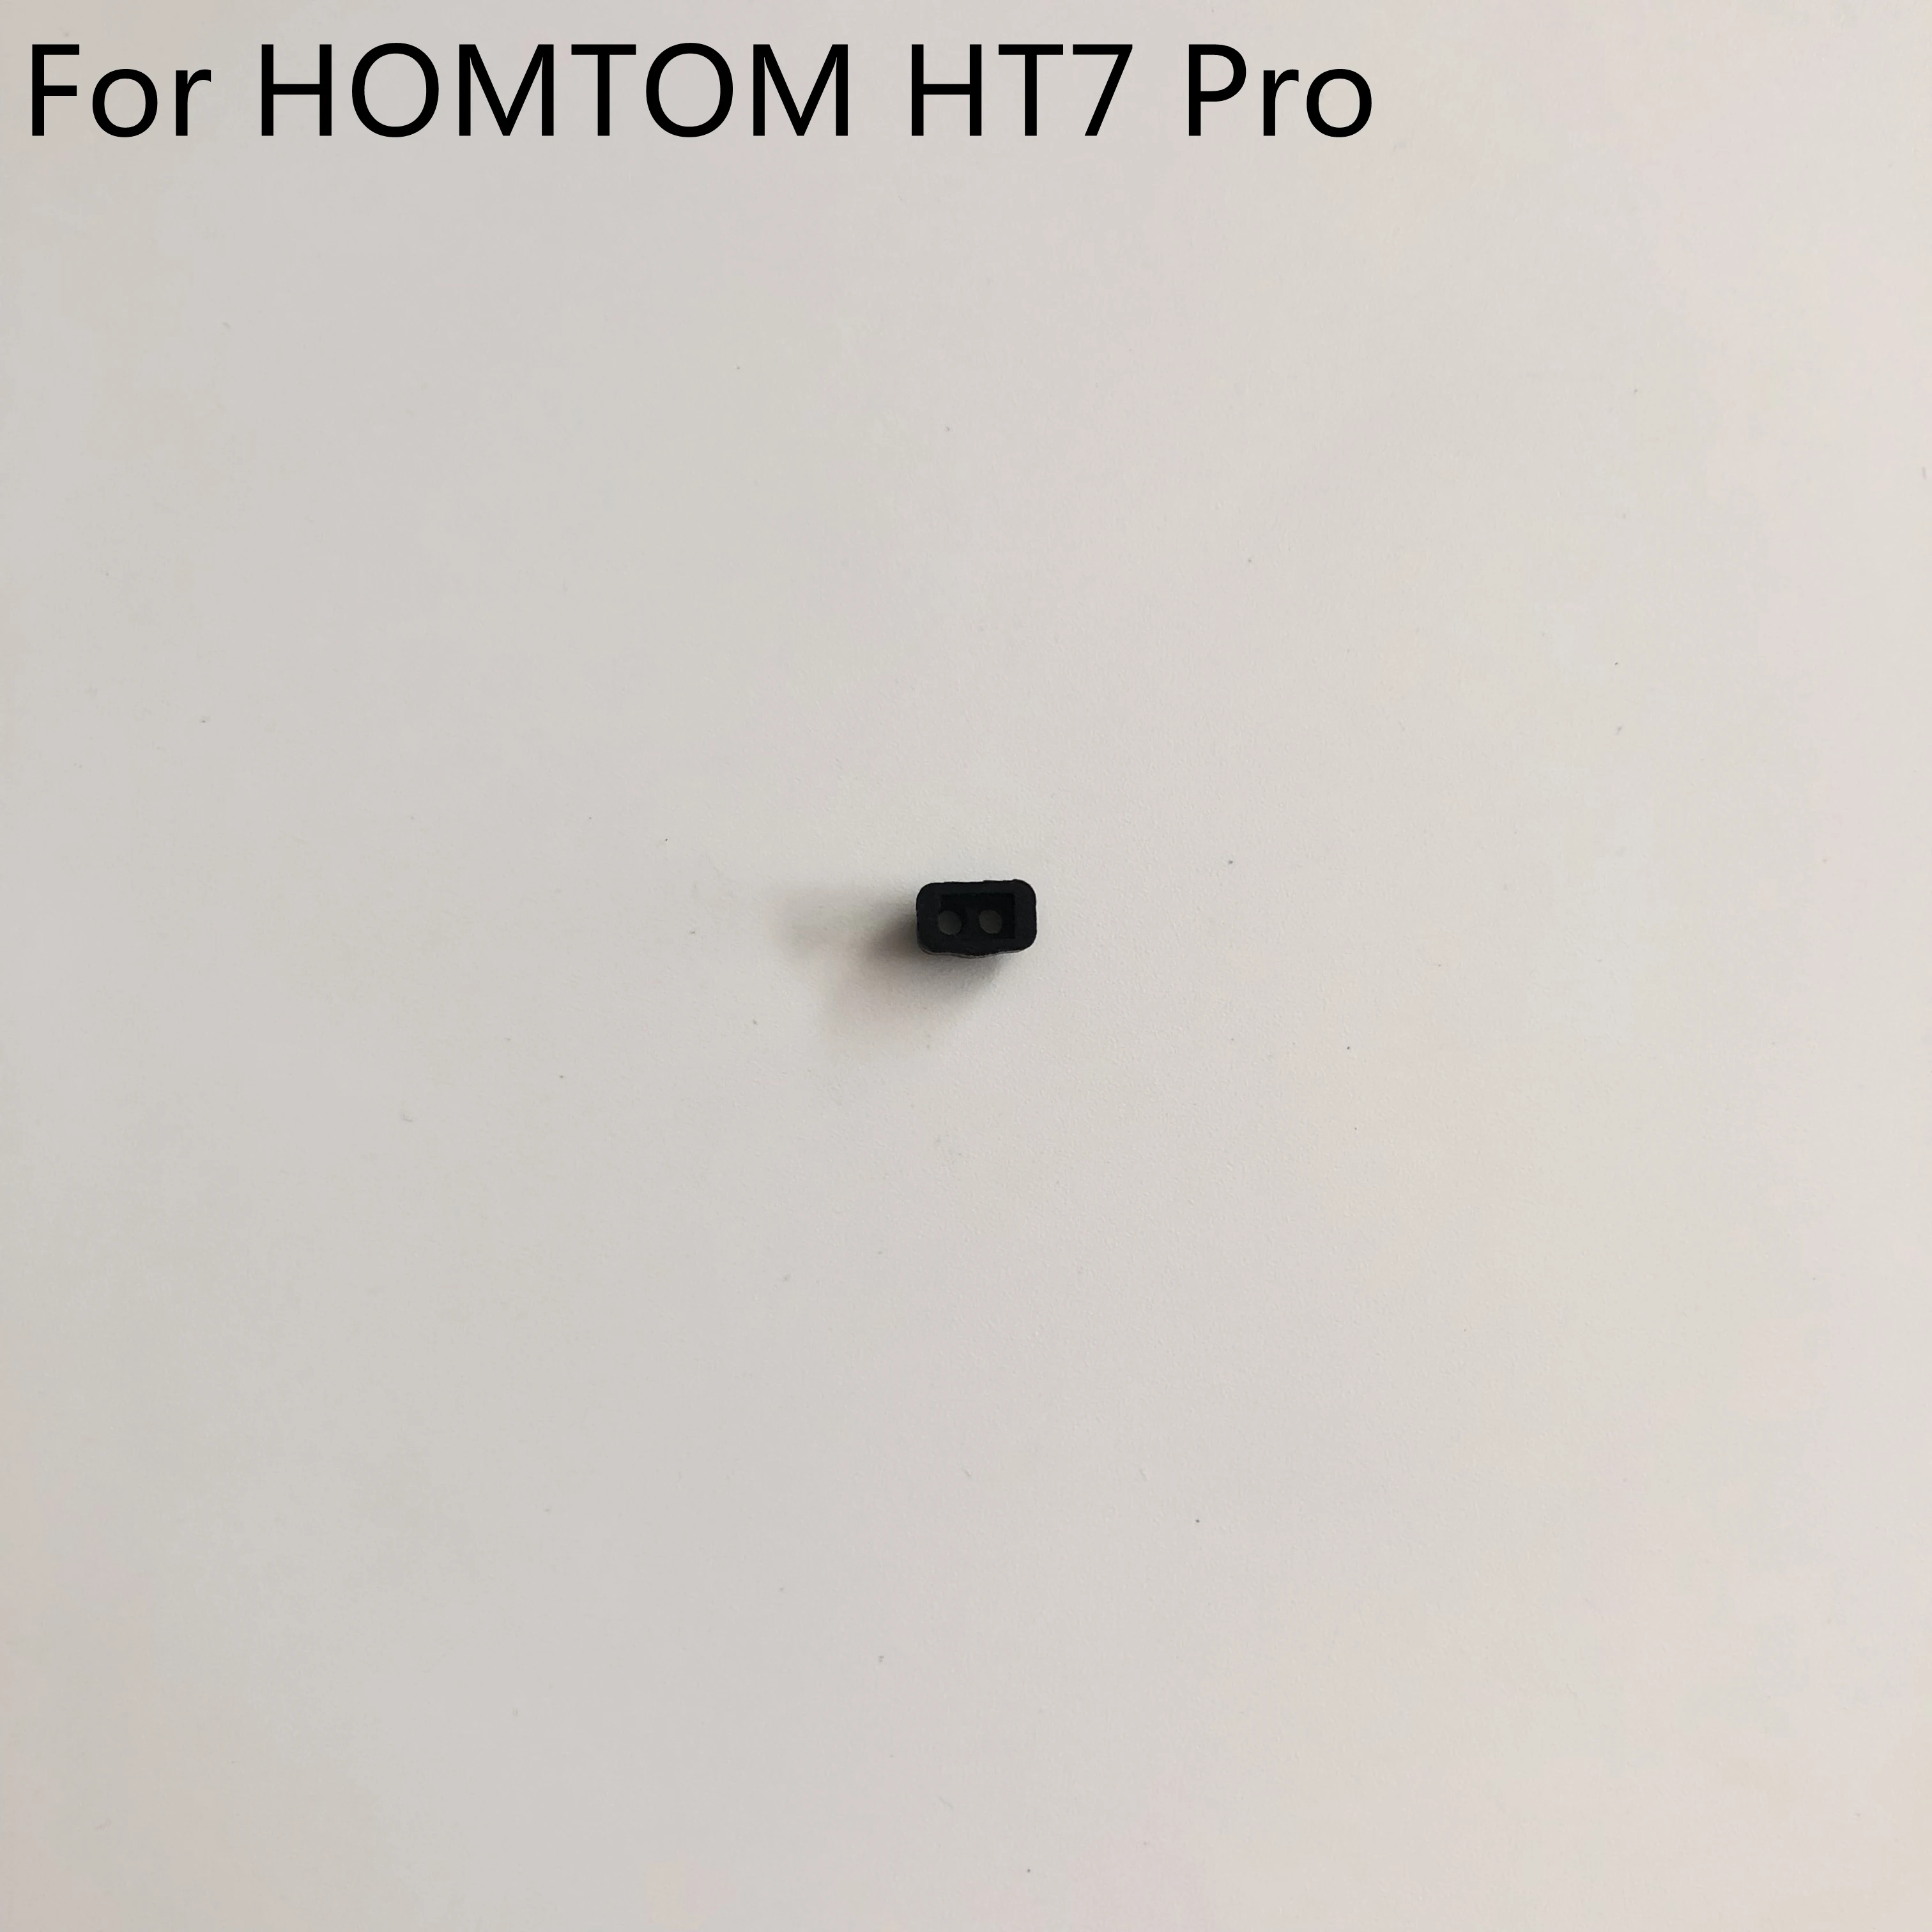 

Used Phone Proximately Sensor Rubber Sleeve For HOMTOM HT7 Pro MTK6580 Quad Core 5.5 Inch HD 1280x720 Smartphone